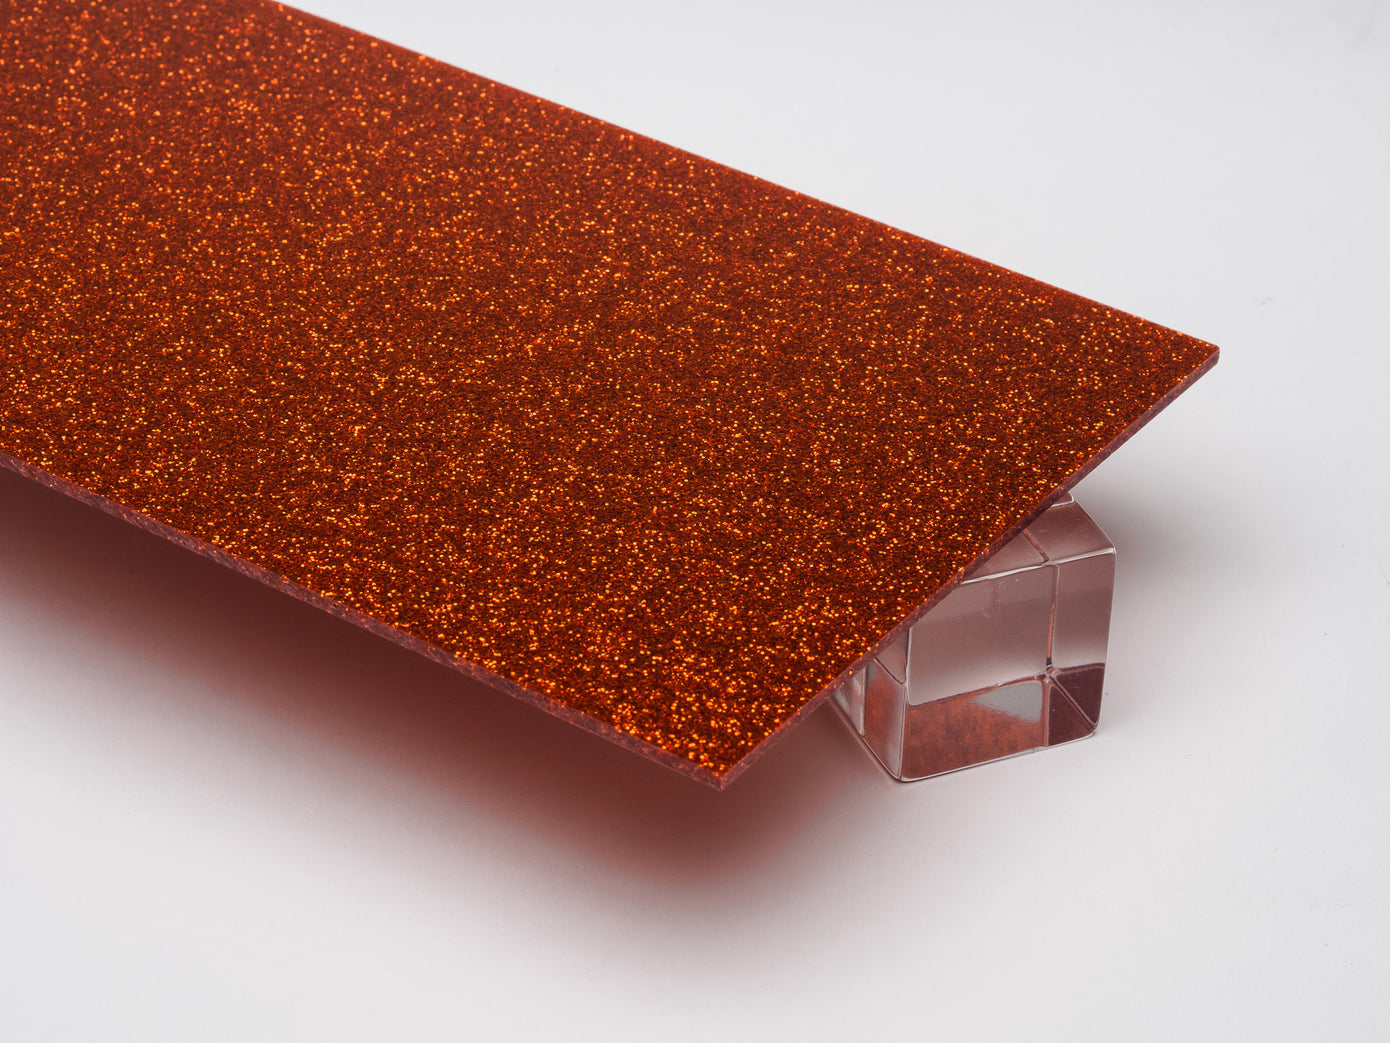 Copper Holographic Glitter Acrylic Sheet - 300x200x3mm